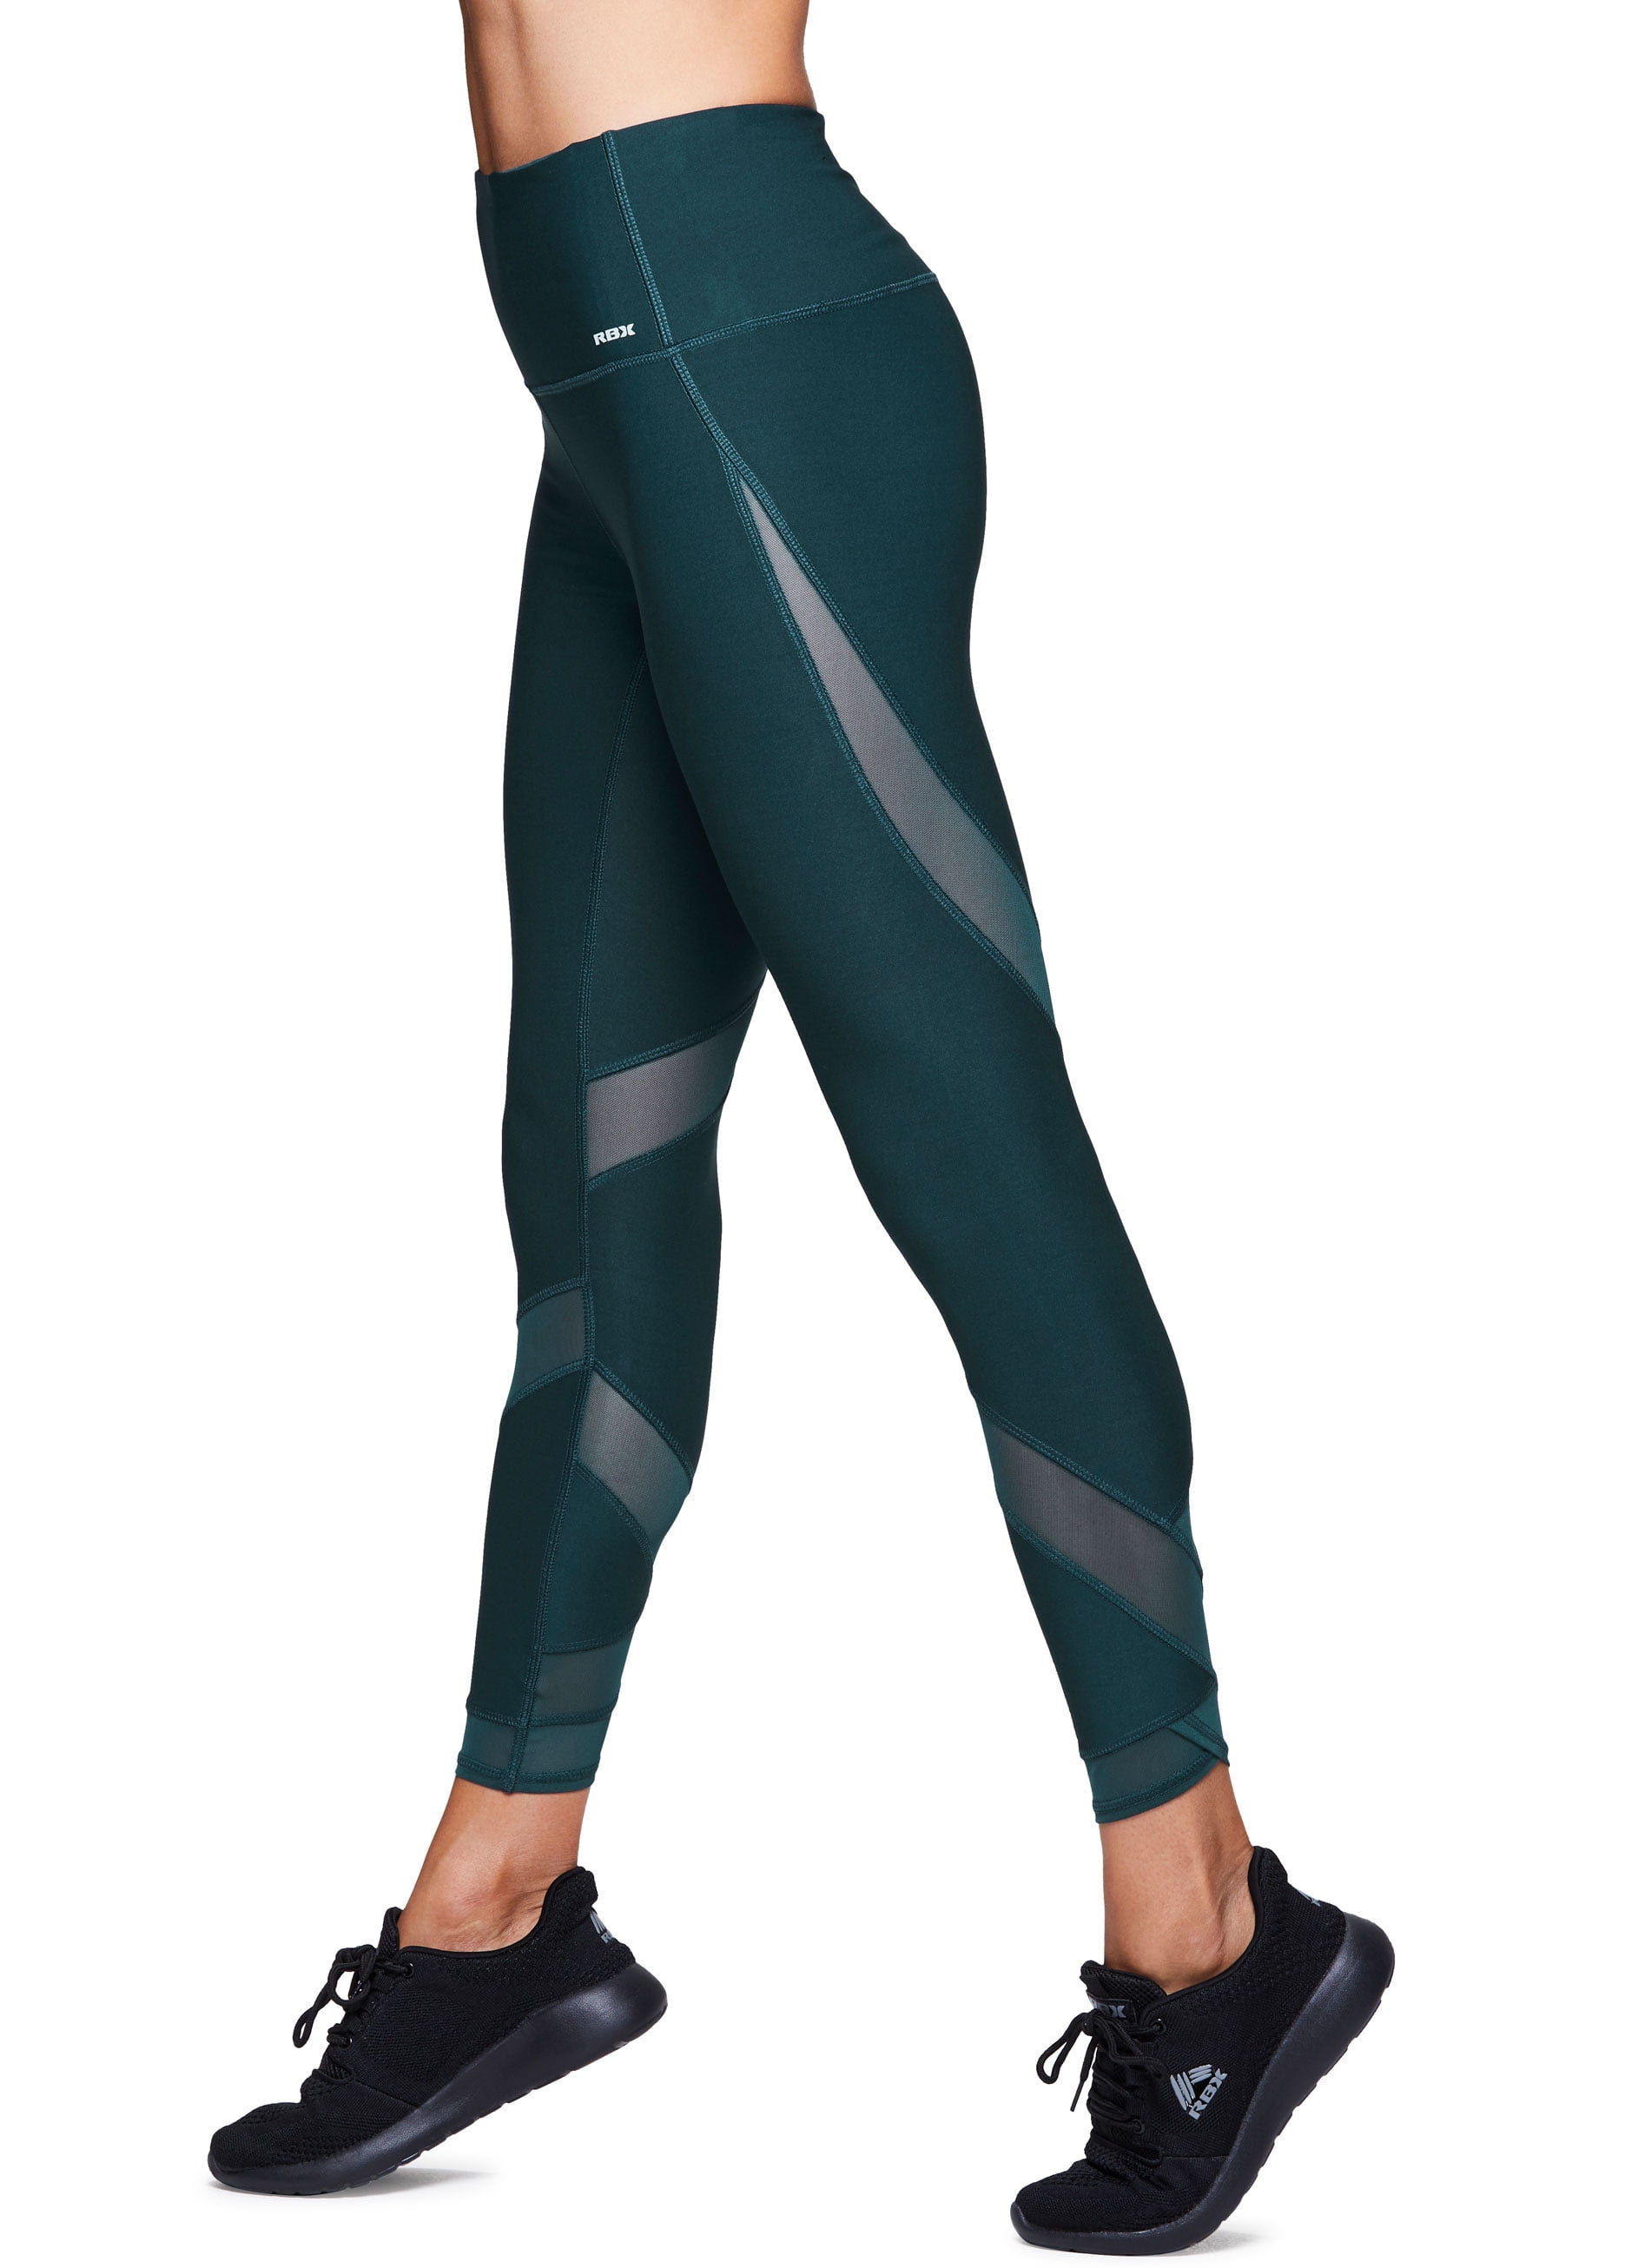 Rbx Active Leggings Reviews  International Society of Precision Agriculture